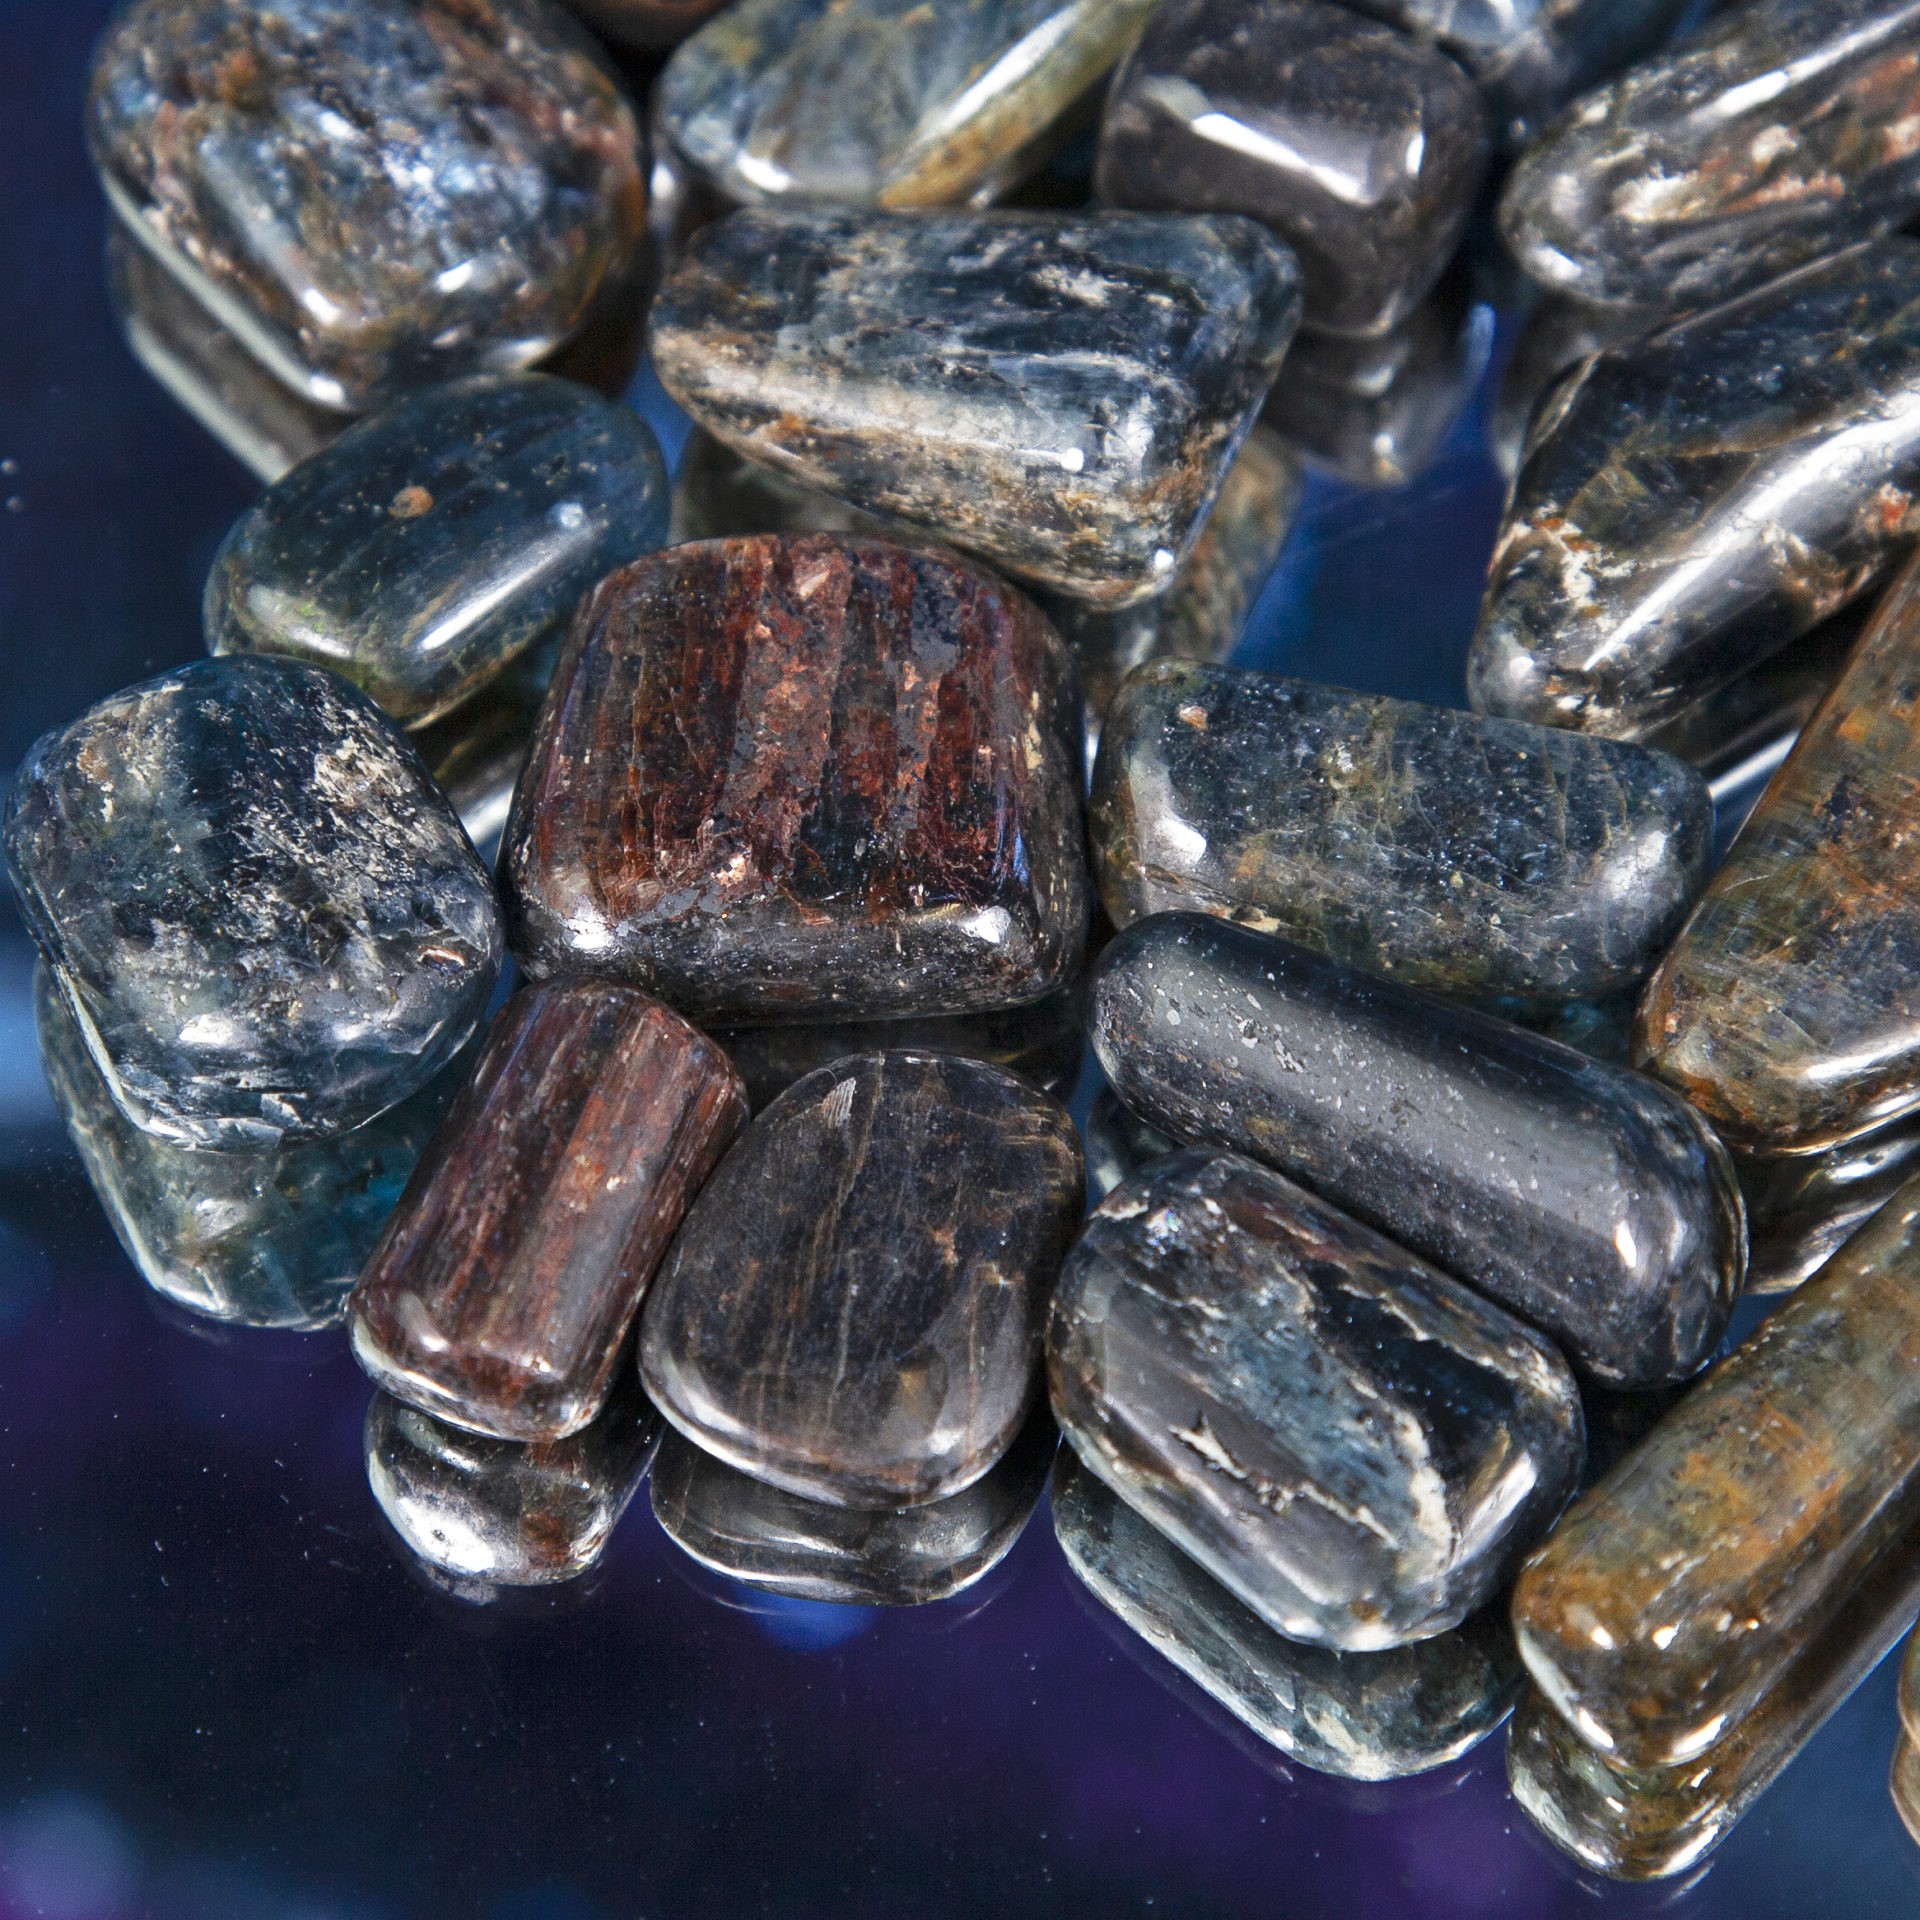 Garnet Meaning and Healing Powers - Our ultimate guide